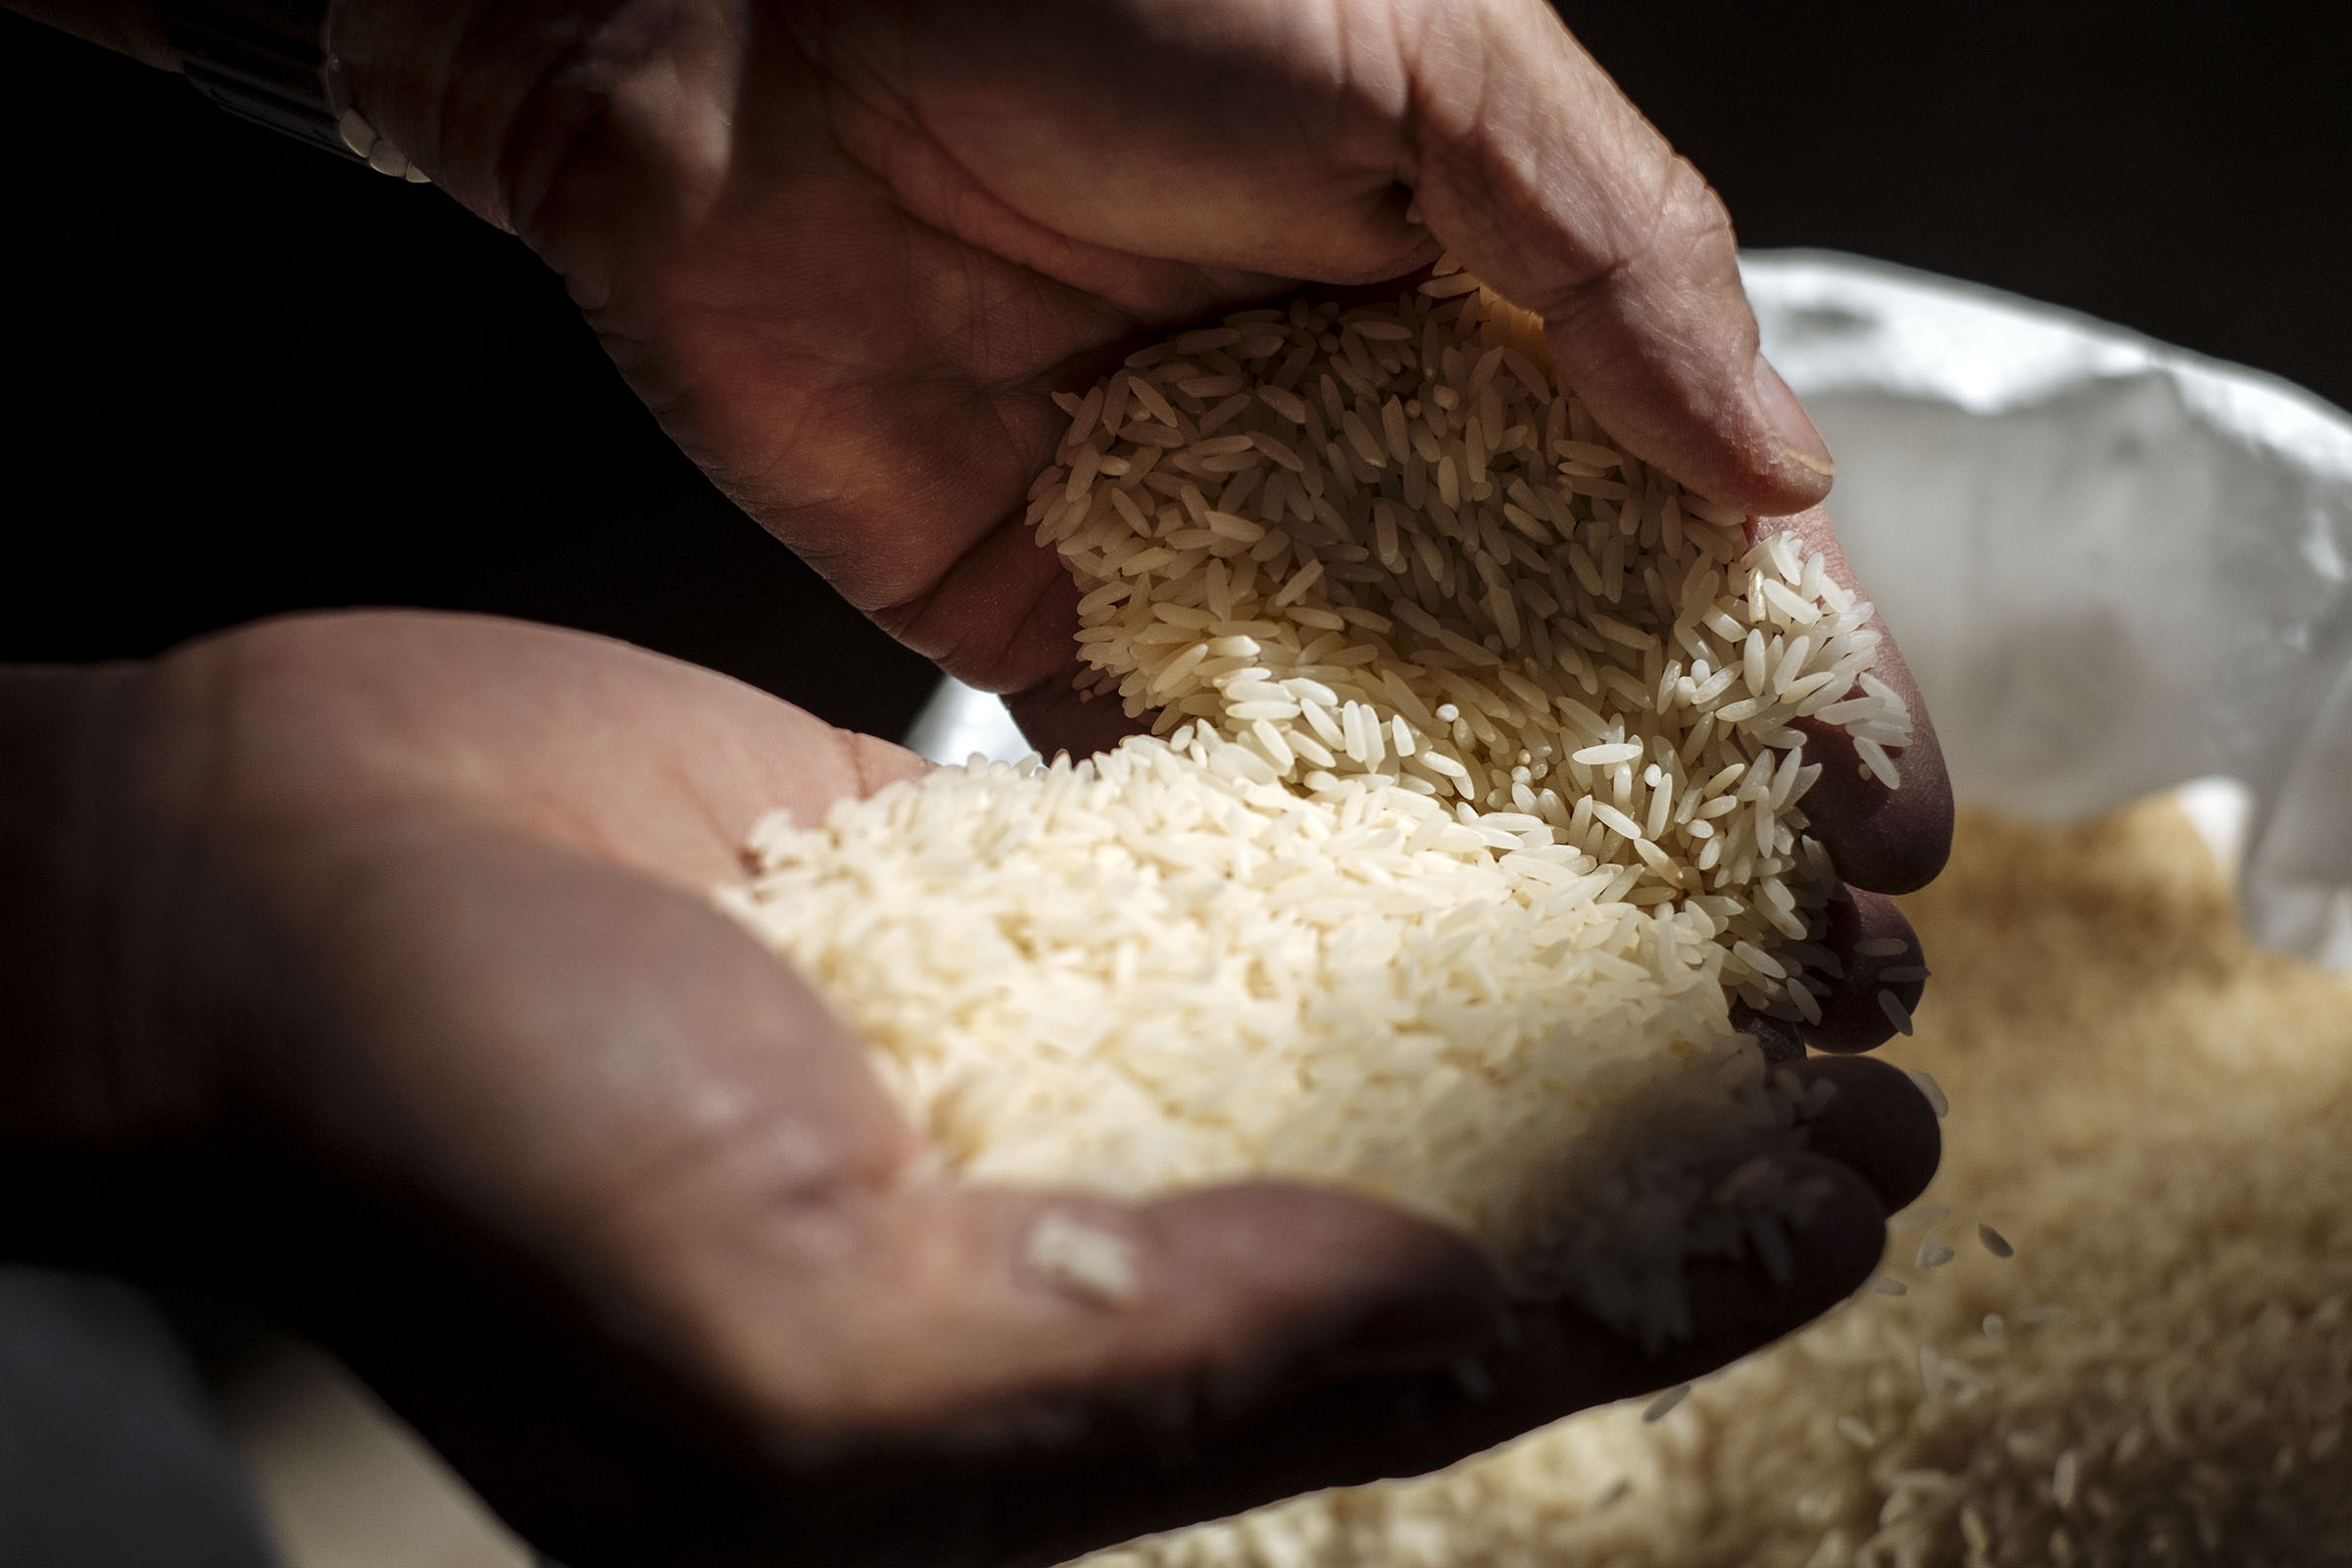 Hands hold a portion of bright white rice